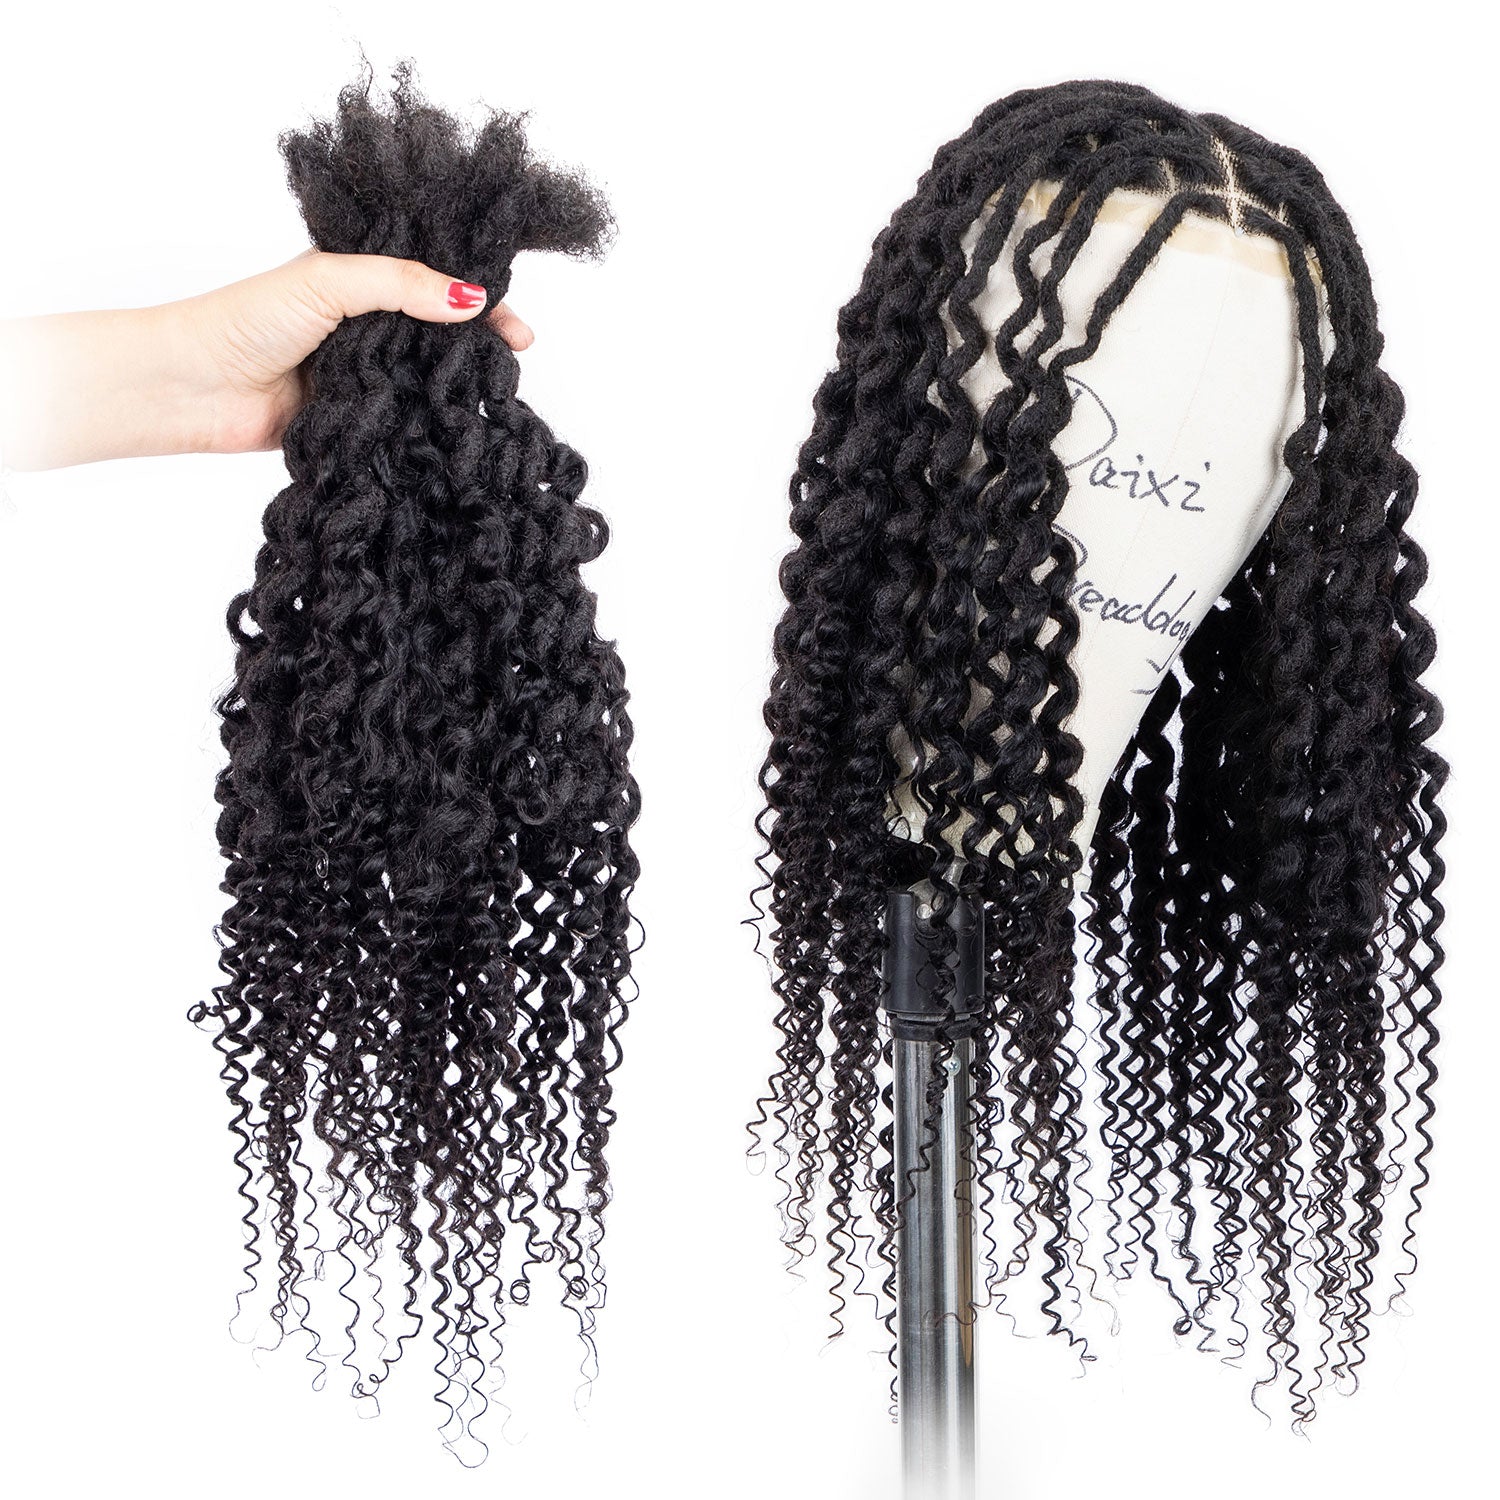 Boho Dreadlocks Extensions with Curly Ends Afro Human Hair Handmade Goddess Locs 0.6cm Thickness